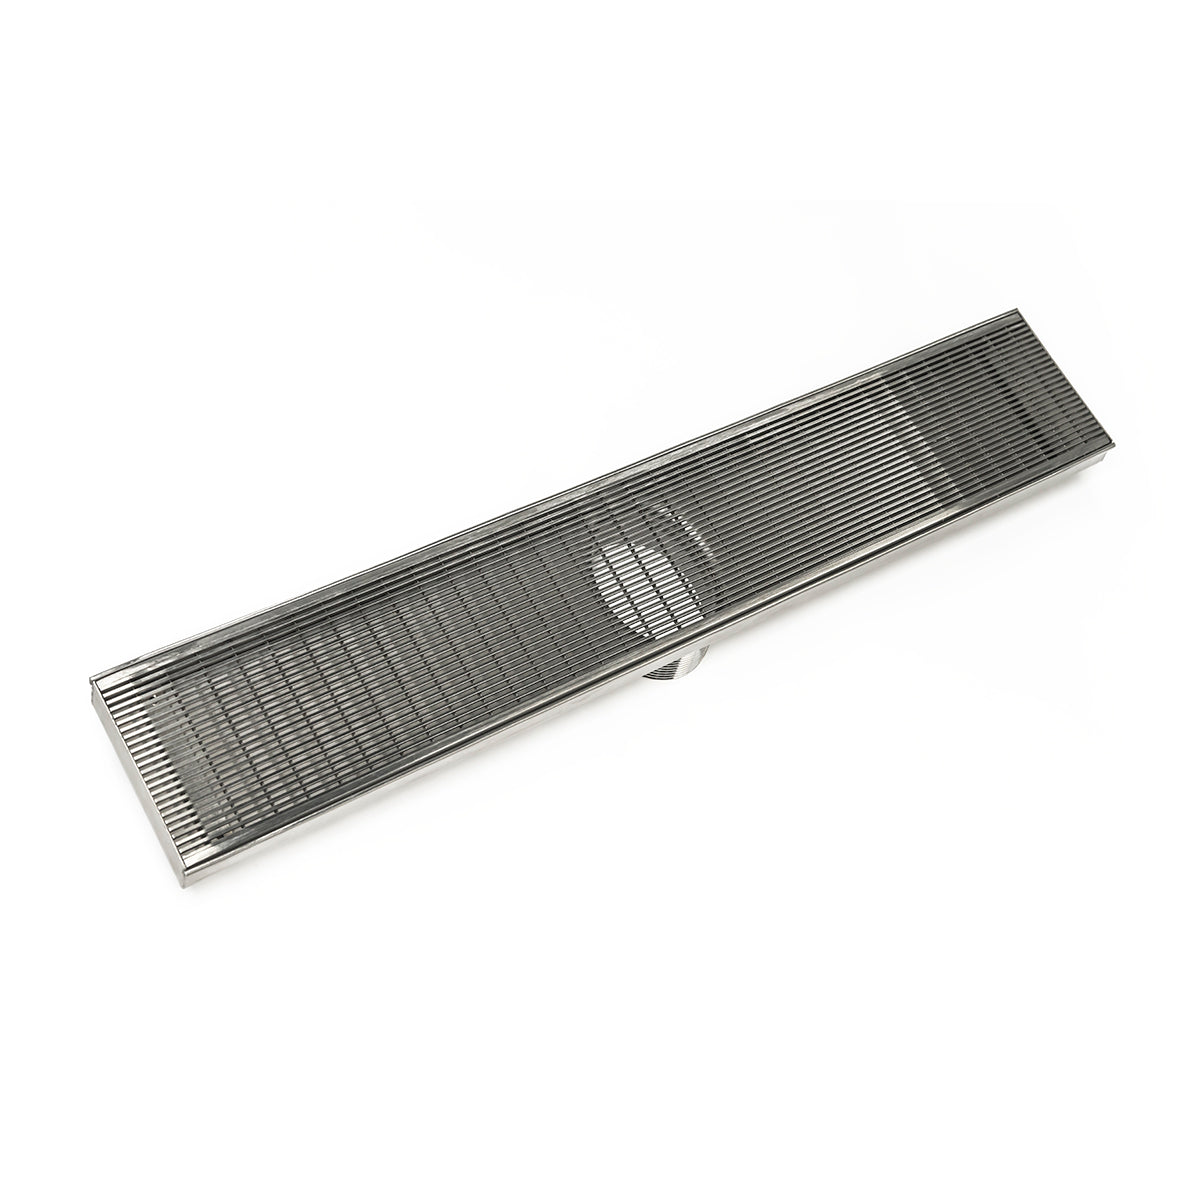 Infinity Drain 32" FX Series High Flow Fixed Length Linear Drain Kit with Wedge Wire Grate with ABS Drain Body